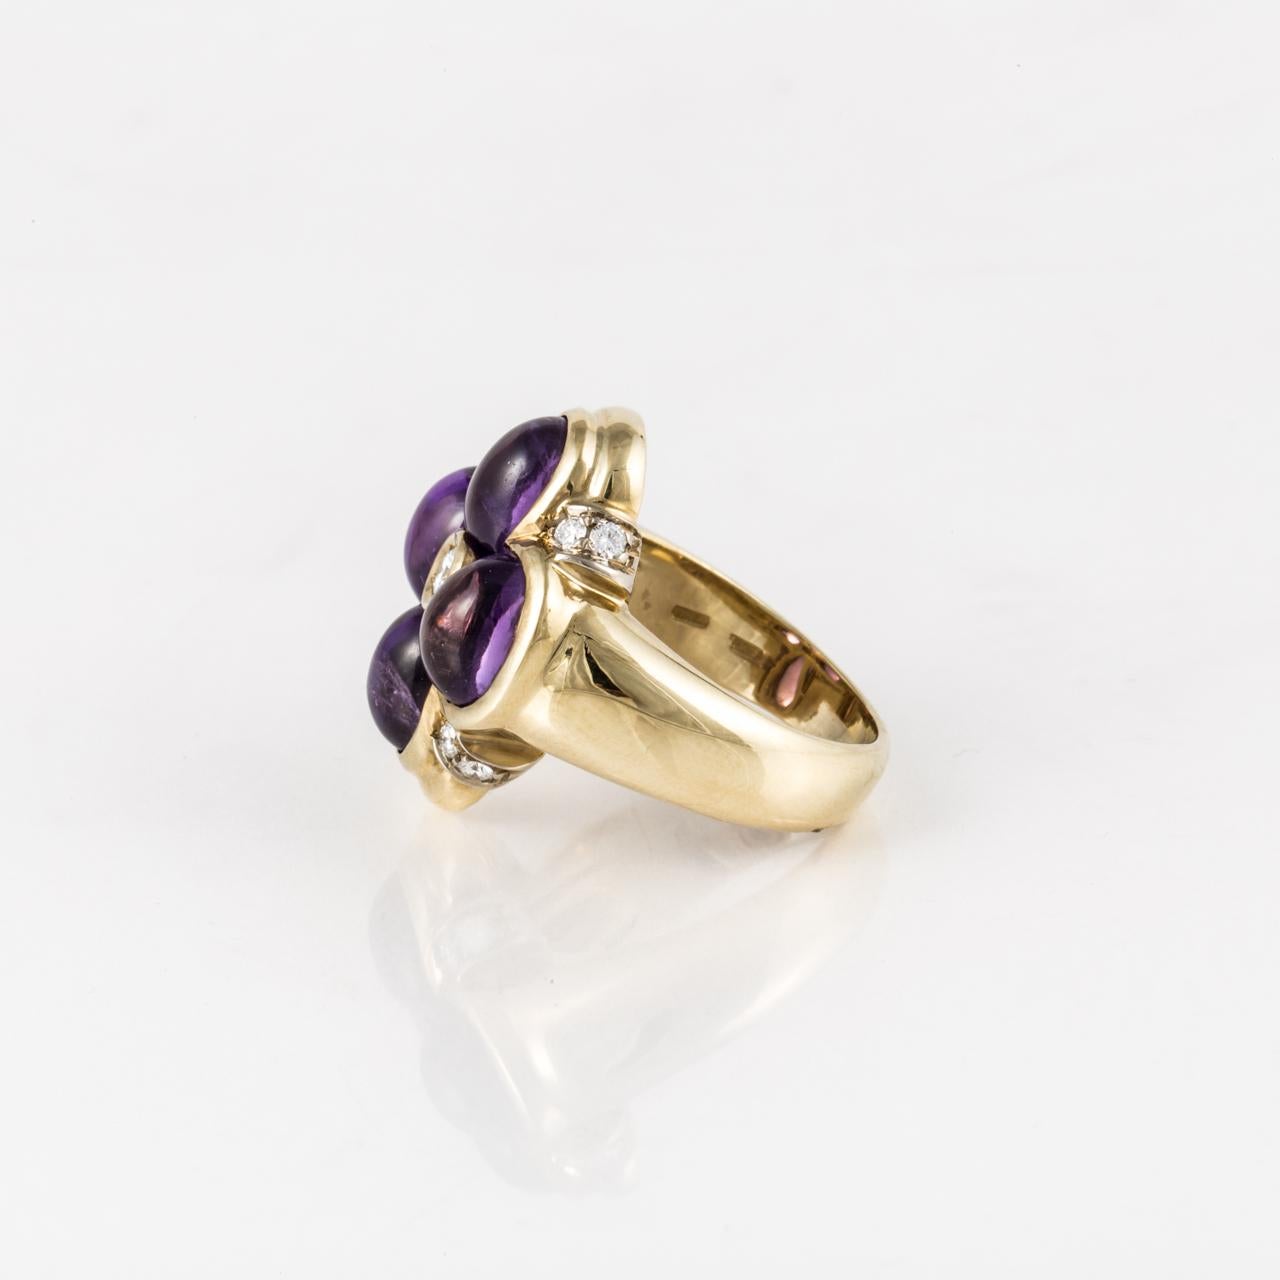 Women's 18K Gold Cabochon Amethyst and Diamond Ring